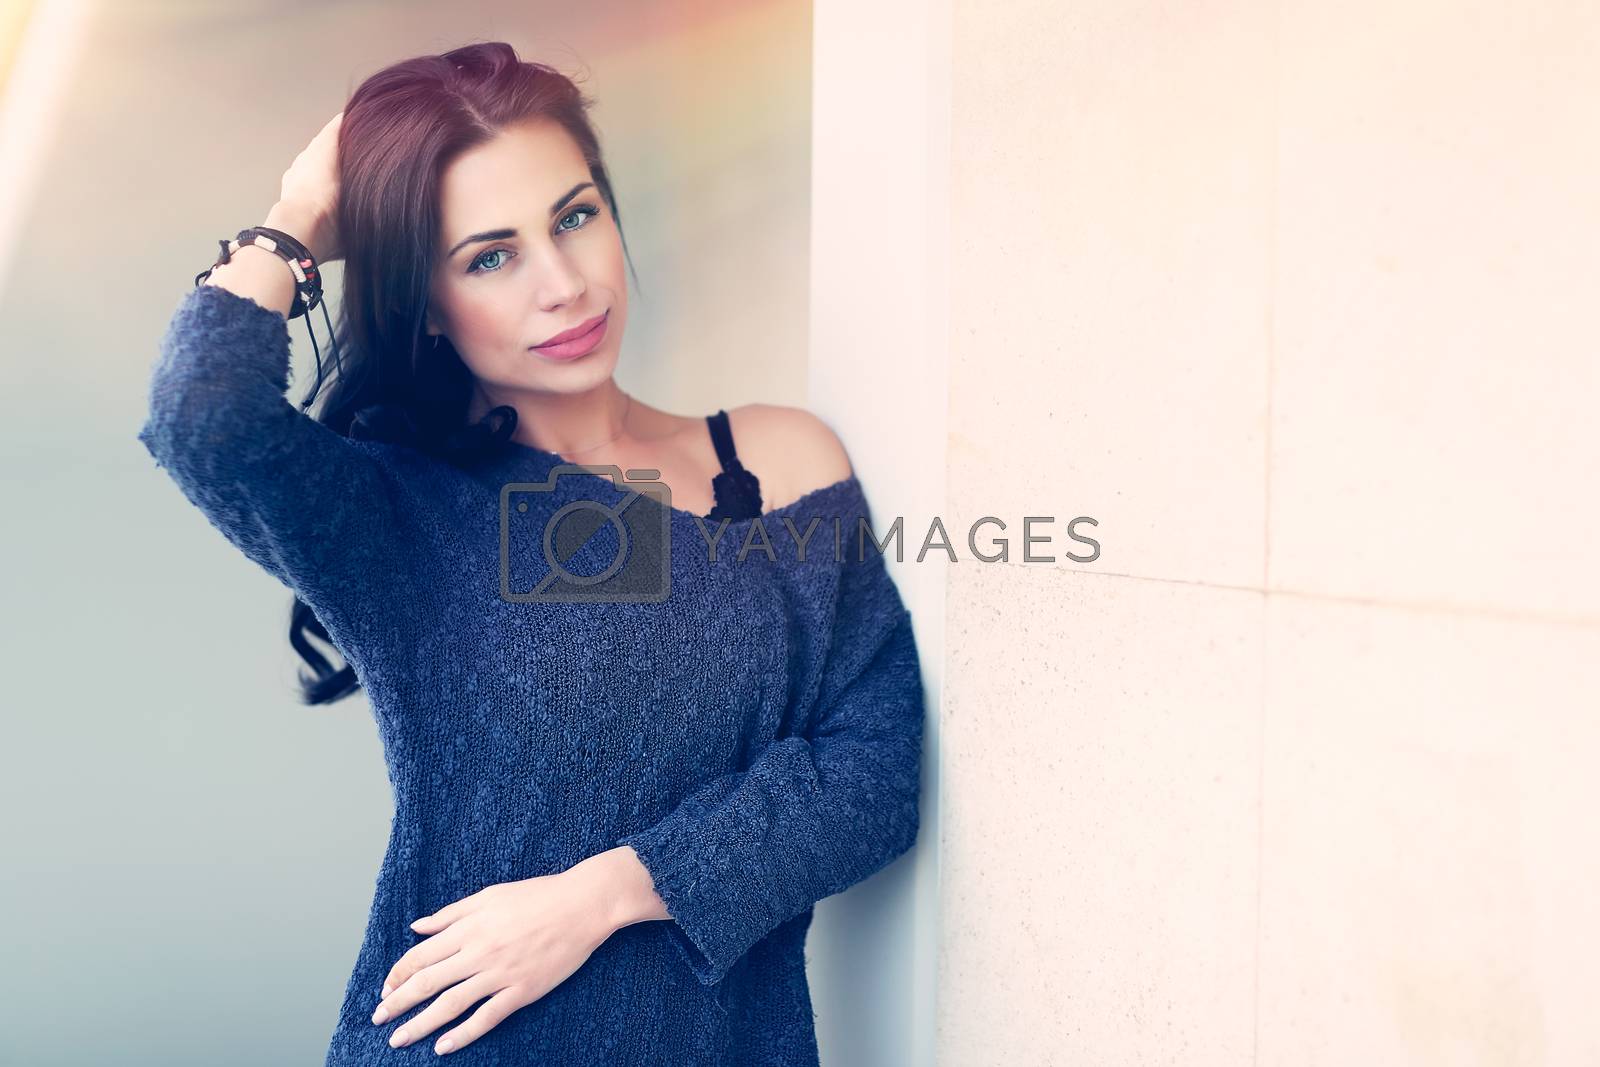 Royalty free image of Gorgeous serious female by Anna_Omelchenko